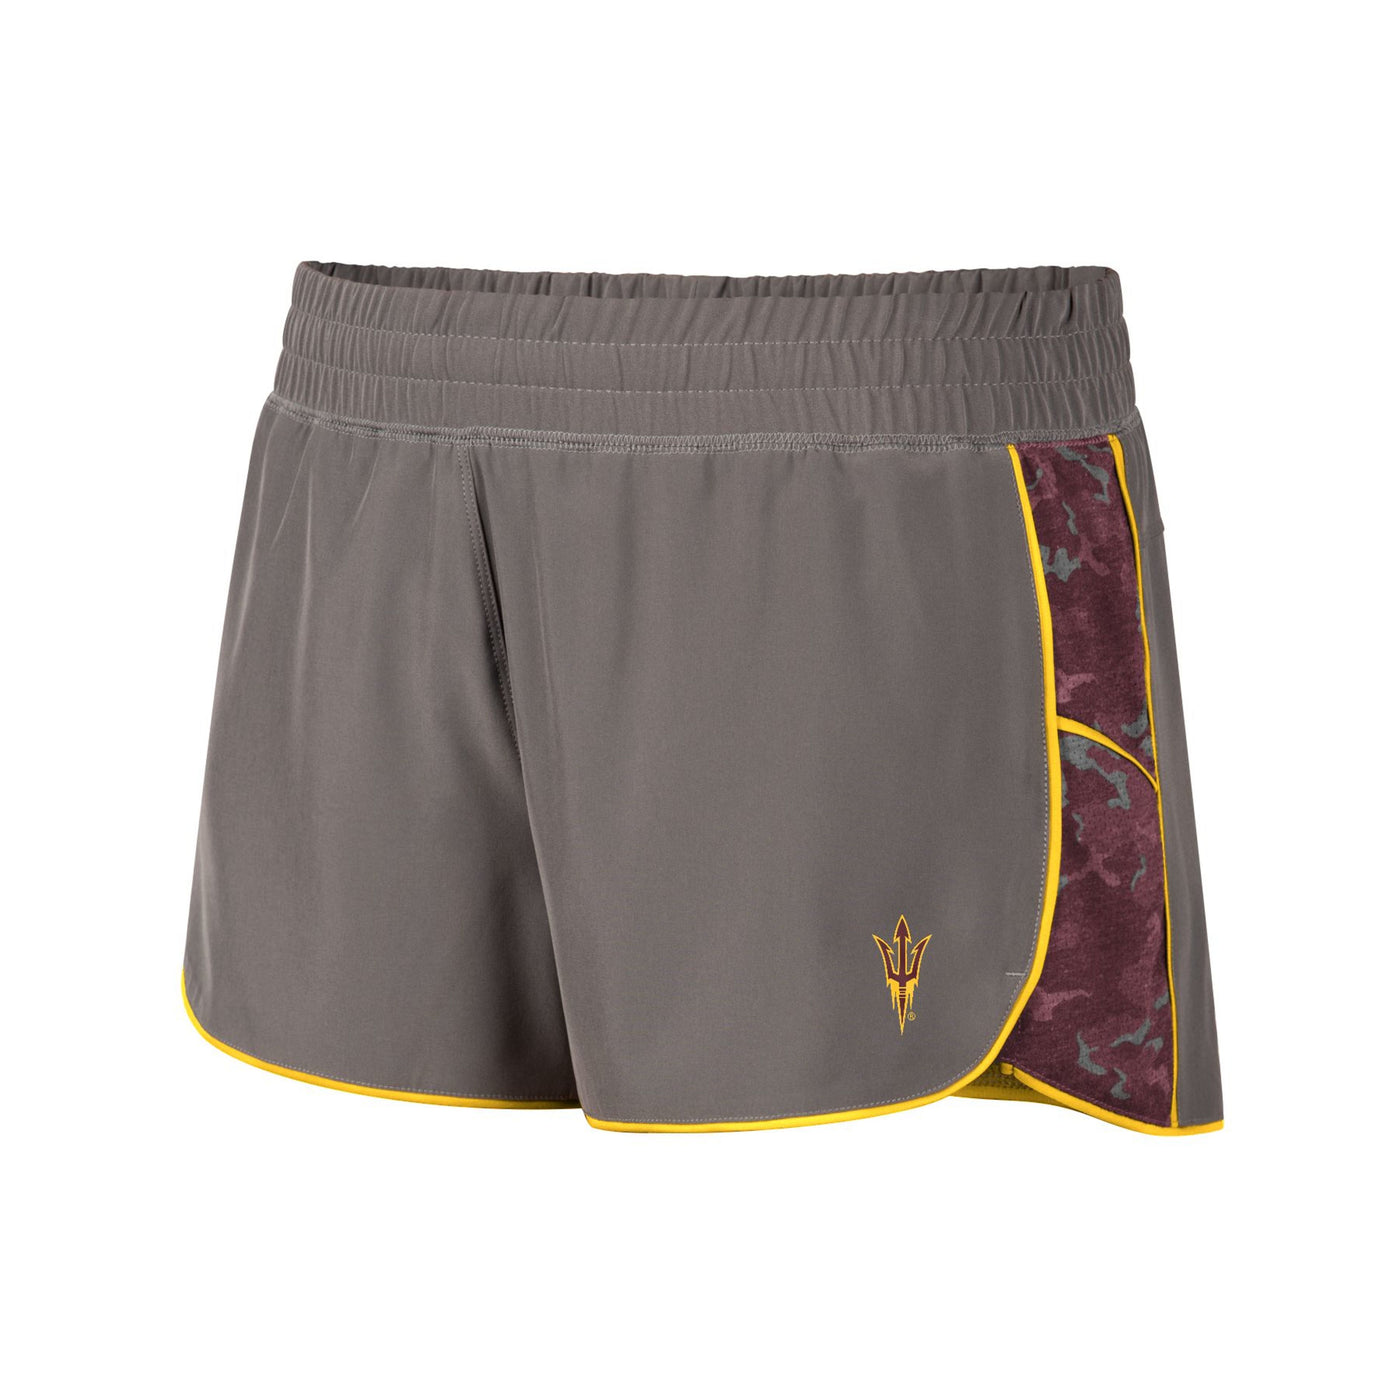 ASU gray shorts with maroon camo stripe and a pitchfork on the leg